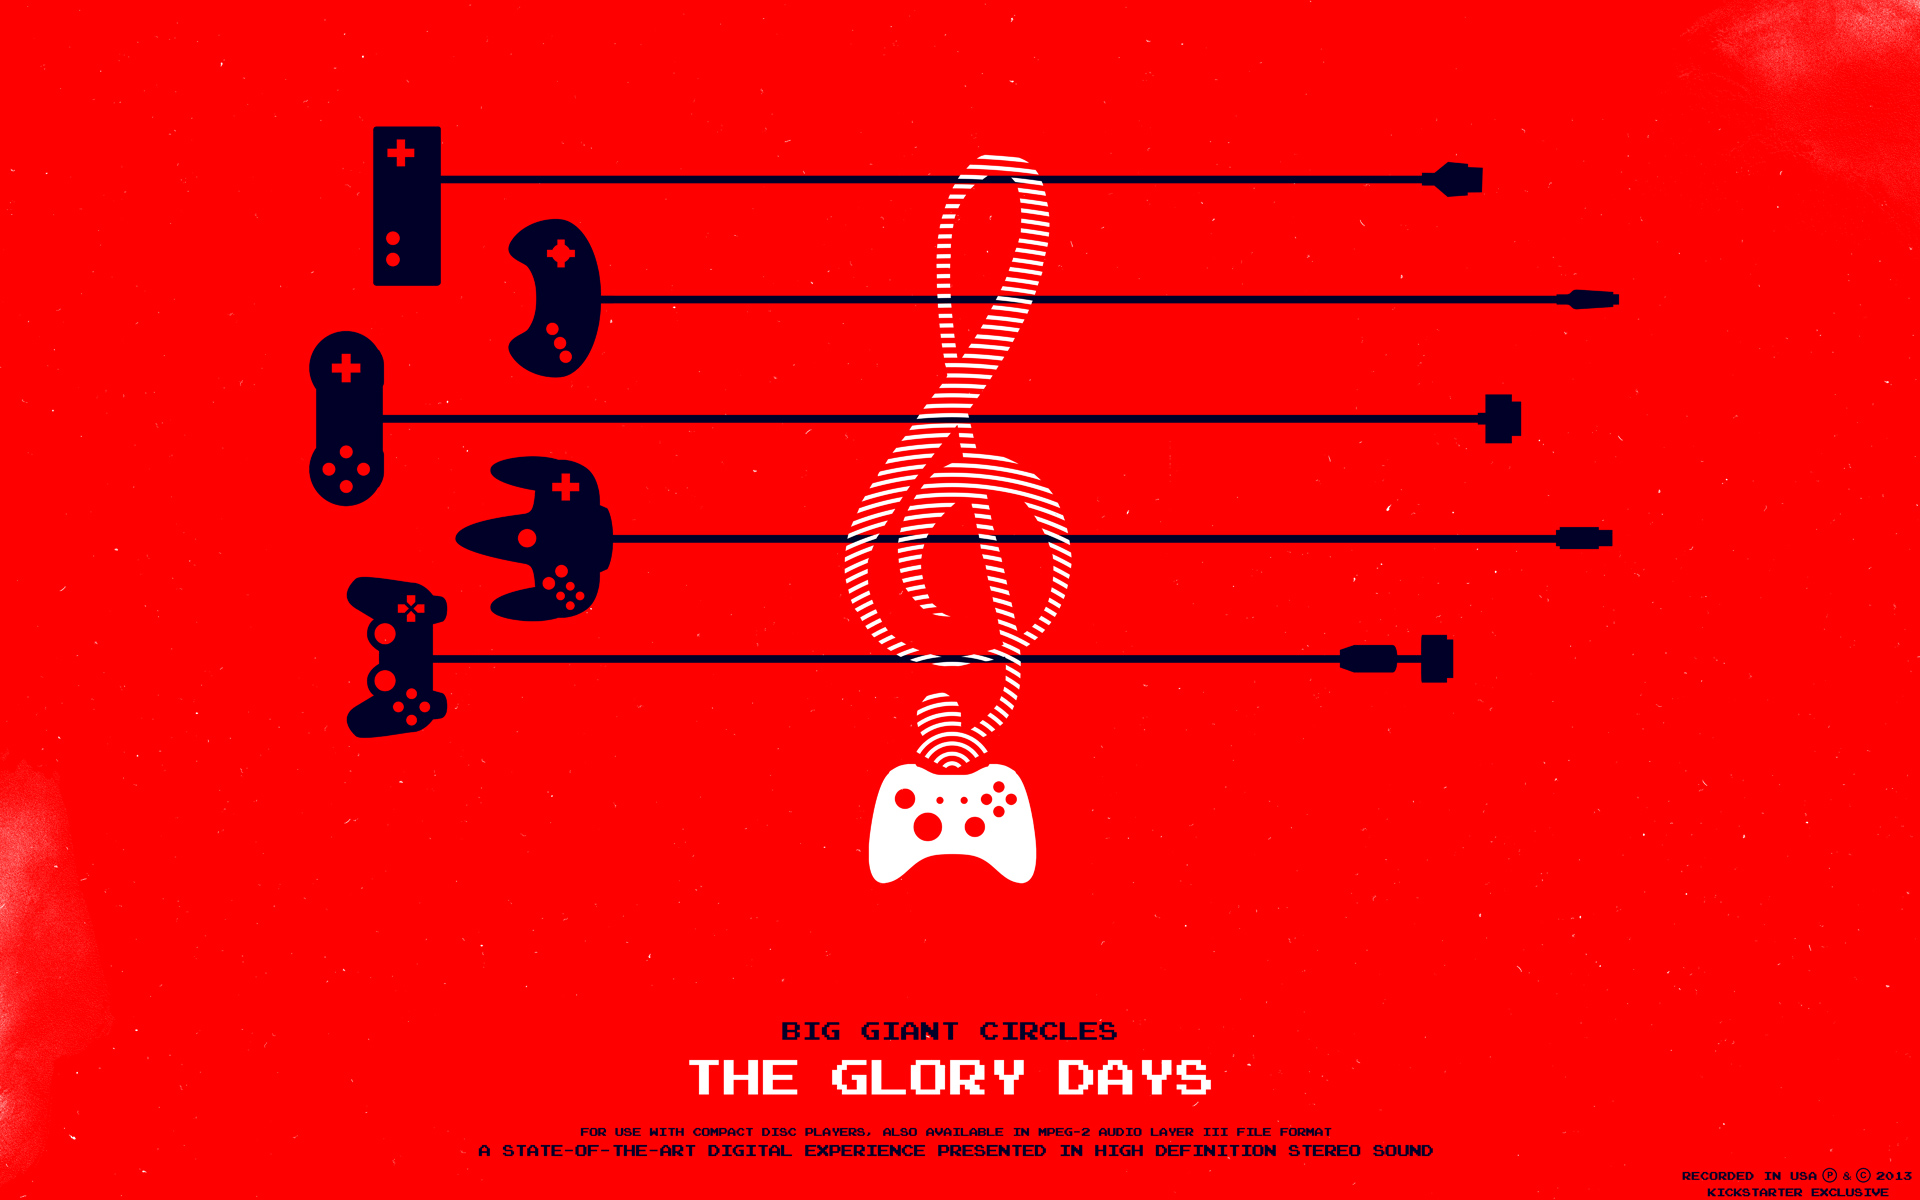 General 1920x1200 Big Giant Circles The Glory Days music red background controllers watermarked DJ digital art simple background